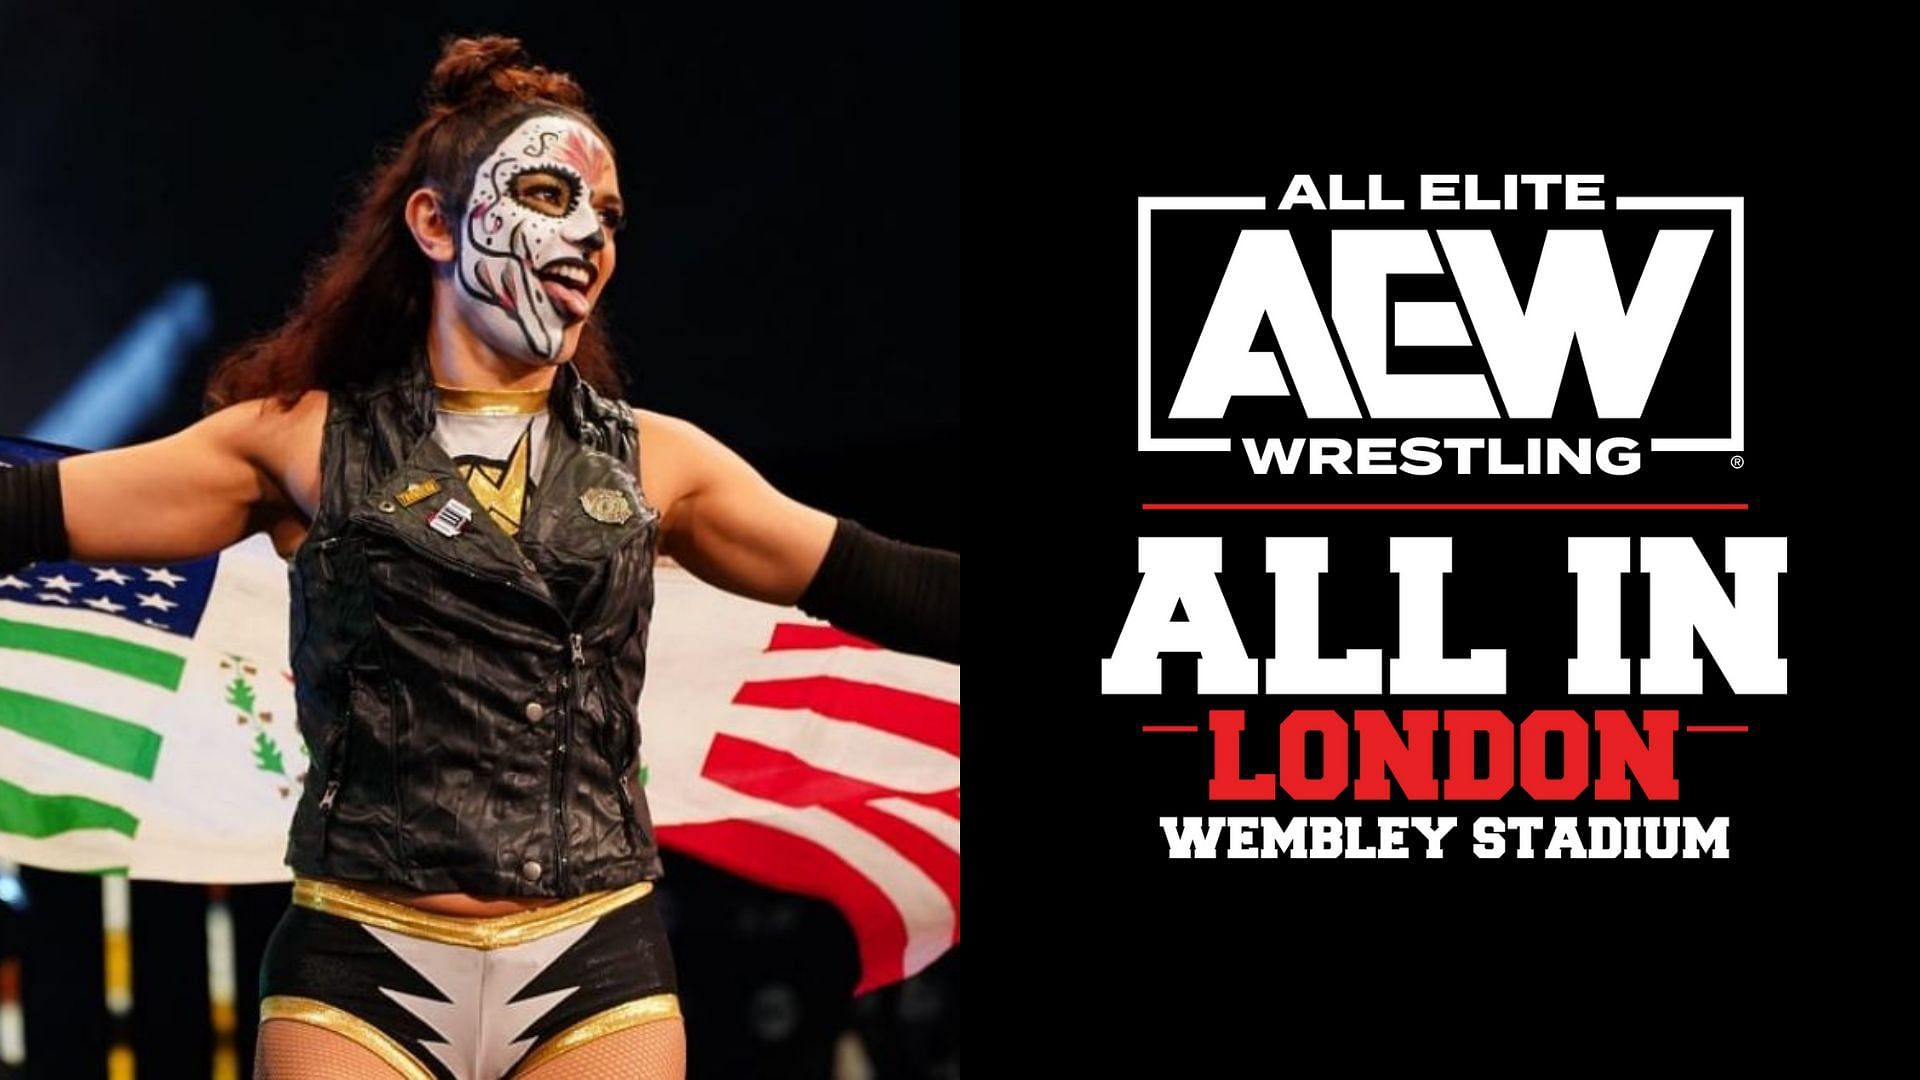 Thunder Rosa is a former AEW Women